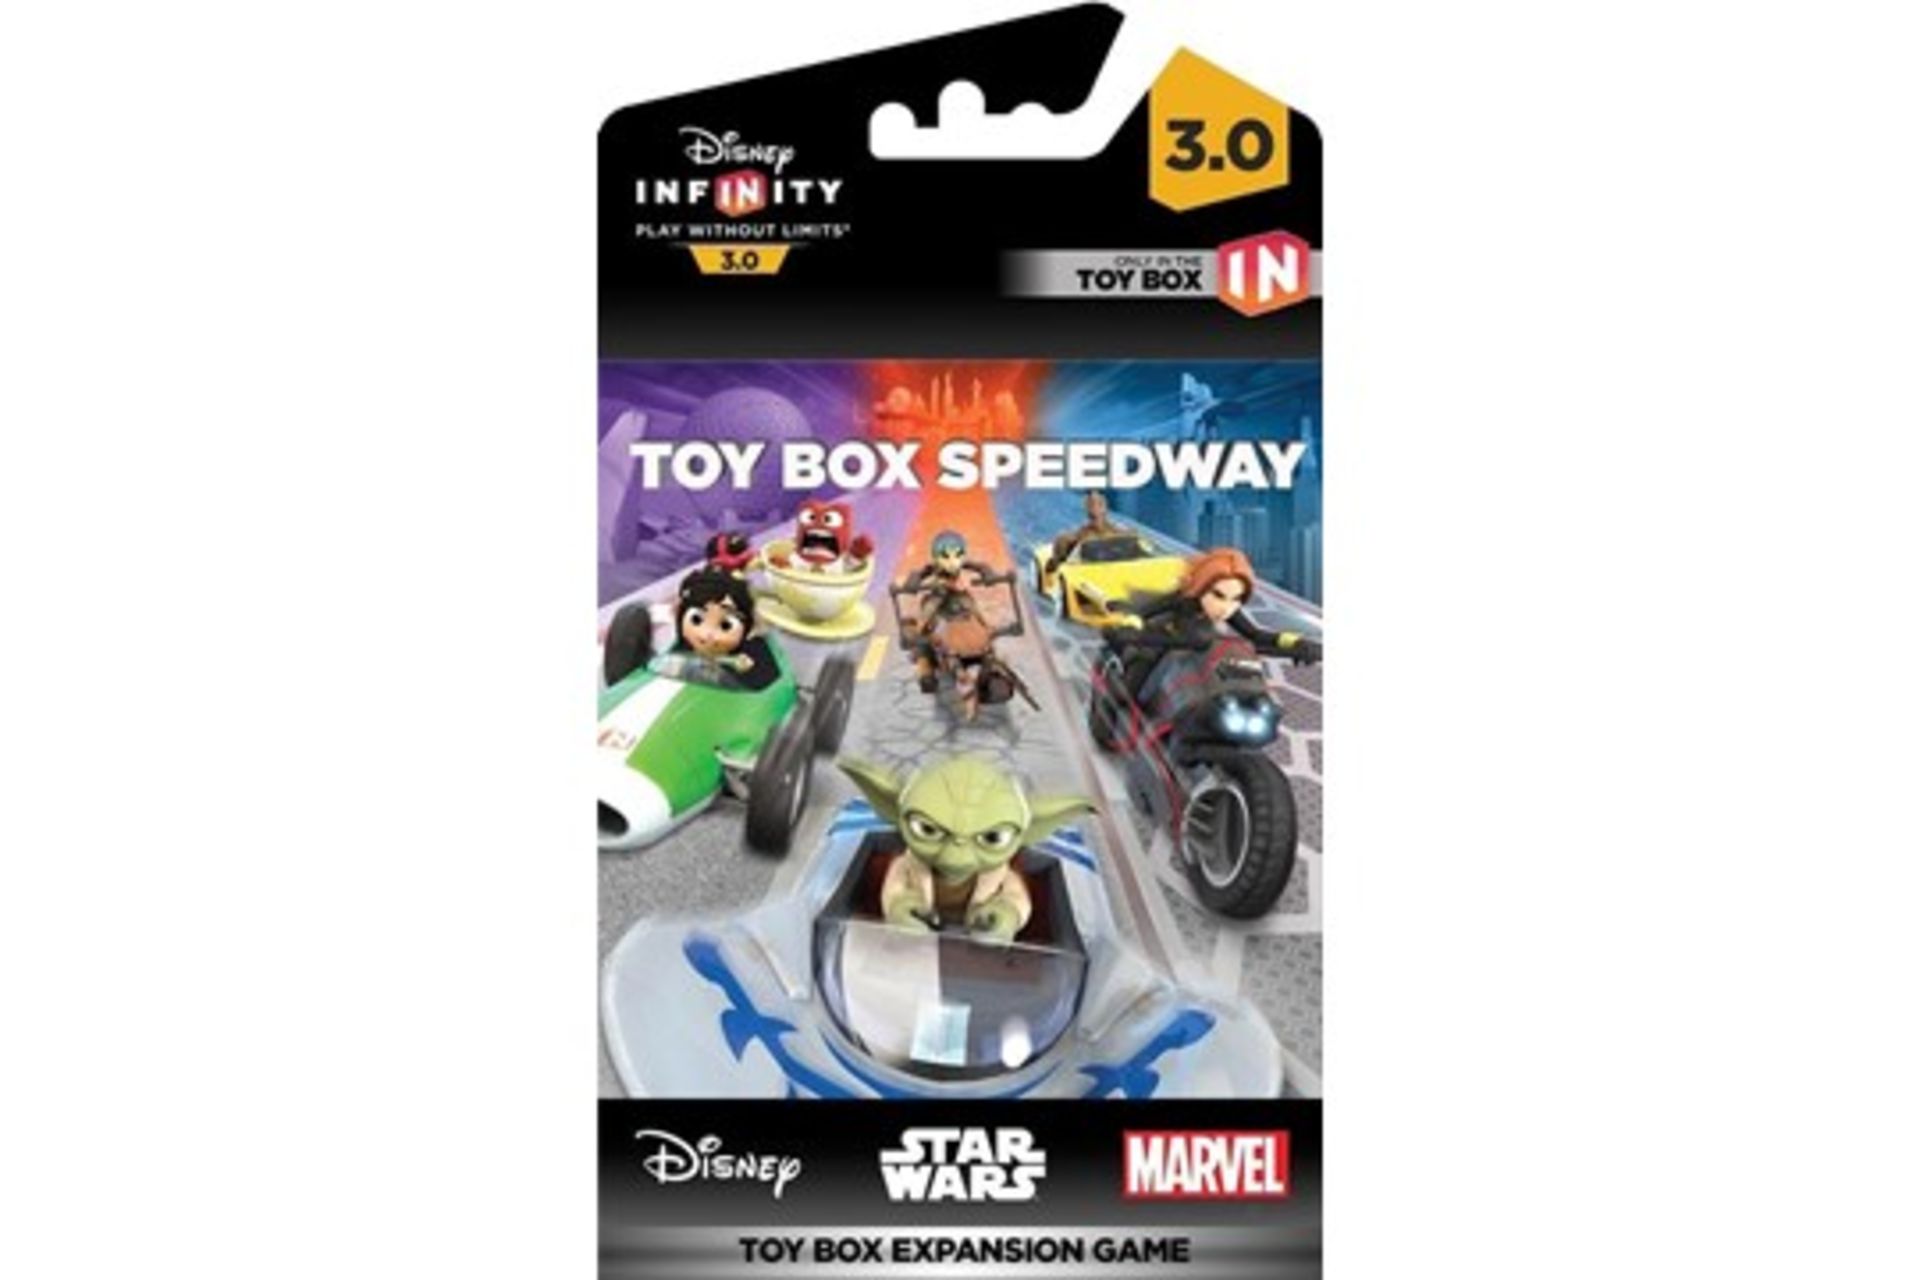 500 x Disney Infinity 3.0 Toy Box Speedway (Toy Box Expansion Game) | RRP £ 9995